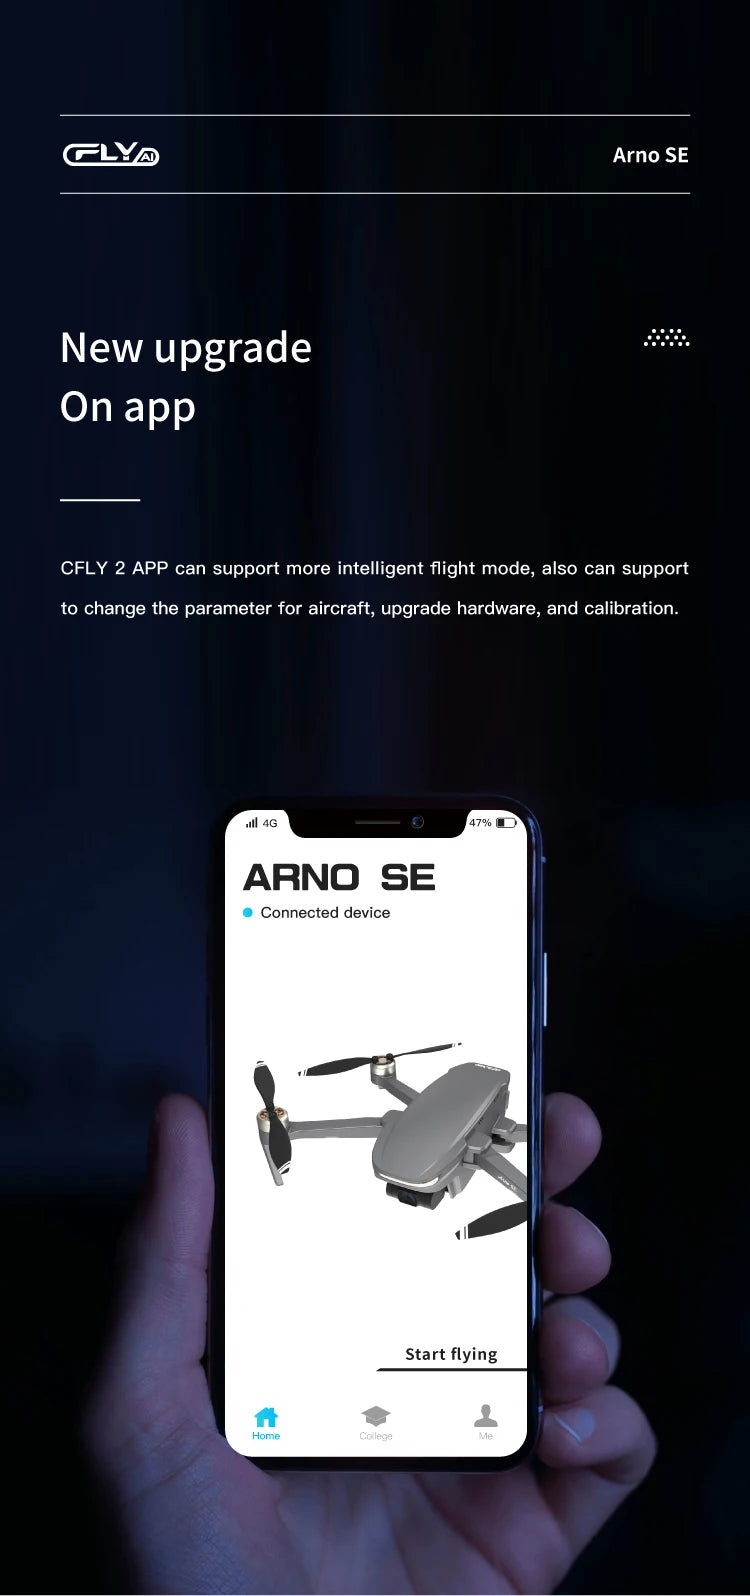 C-FLY Arno SE MAX Drone, CFLY 2 APP can support more intelligent flight mode, also can support to change the